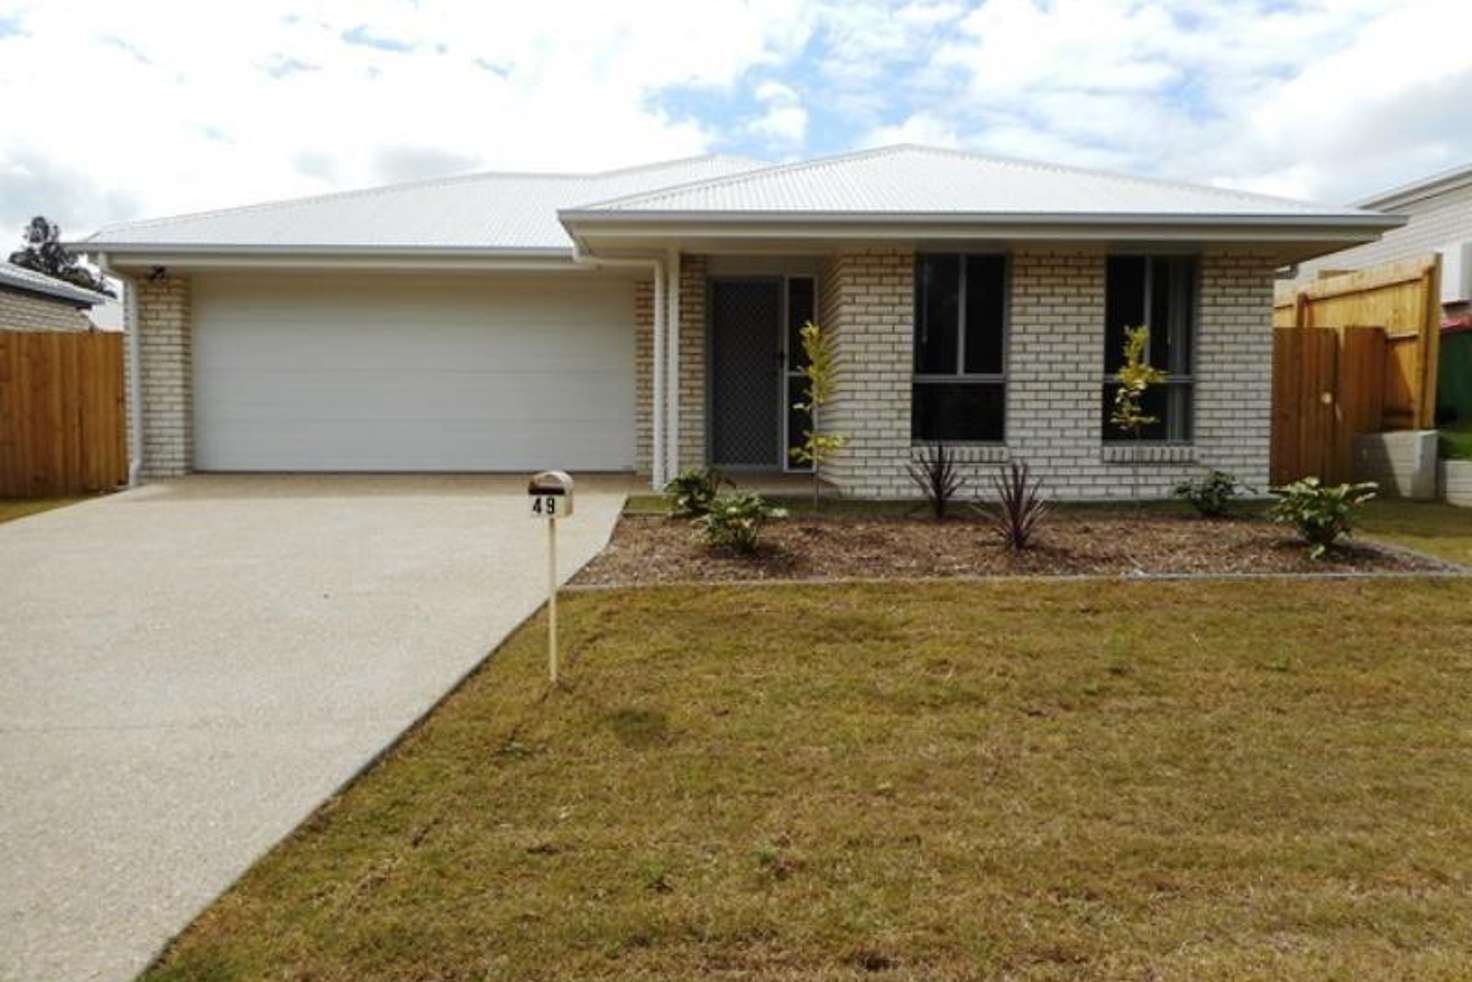 Main view of Homely house listing, 49 Imelda Way, Pimpama QLD 4209